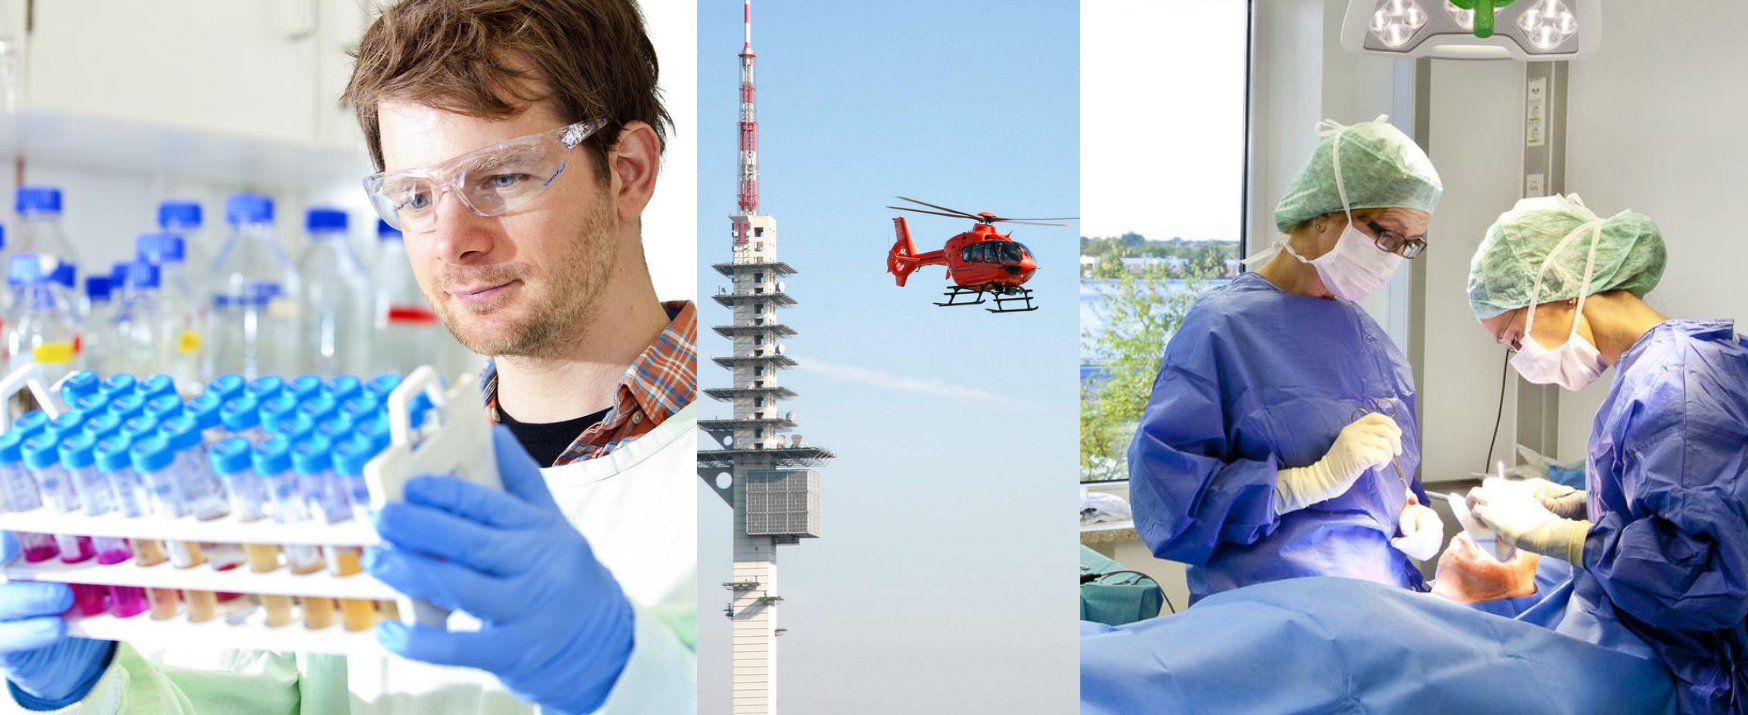 Three pictures: Researcher wearing protective goggles and bracket with tubes with fluids. A red helicopter is flying in the air. Two doctors in surgical protective clothing are standing at a treatment table on which a patient is covered.